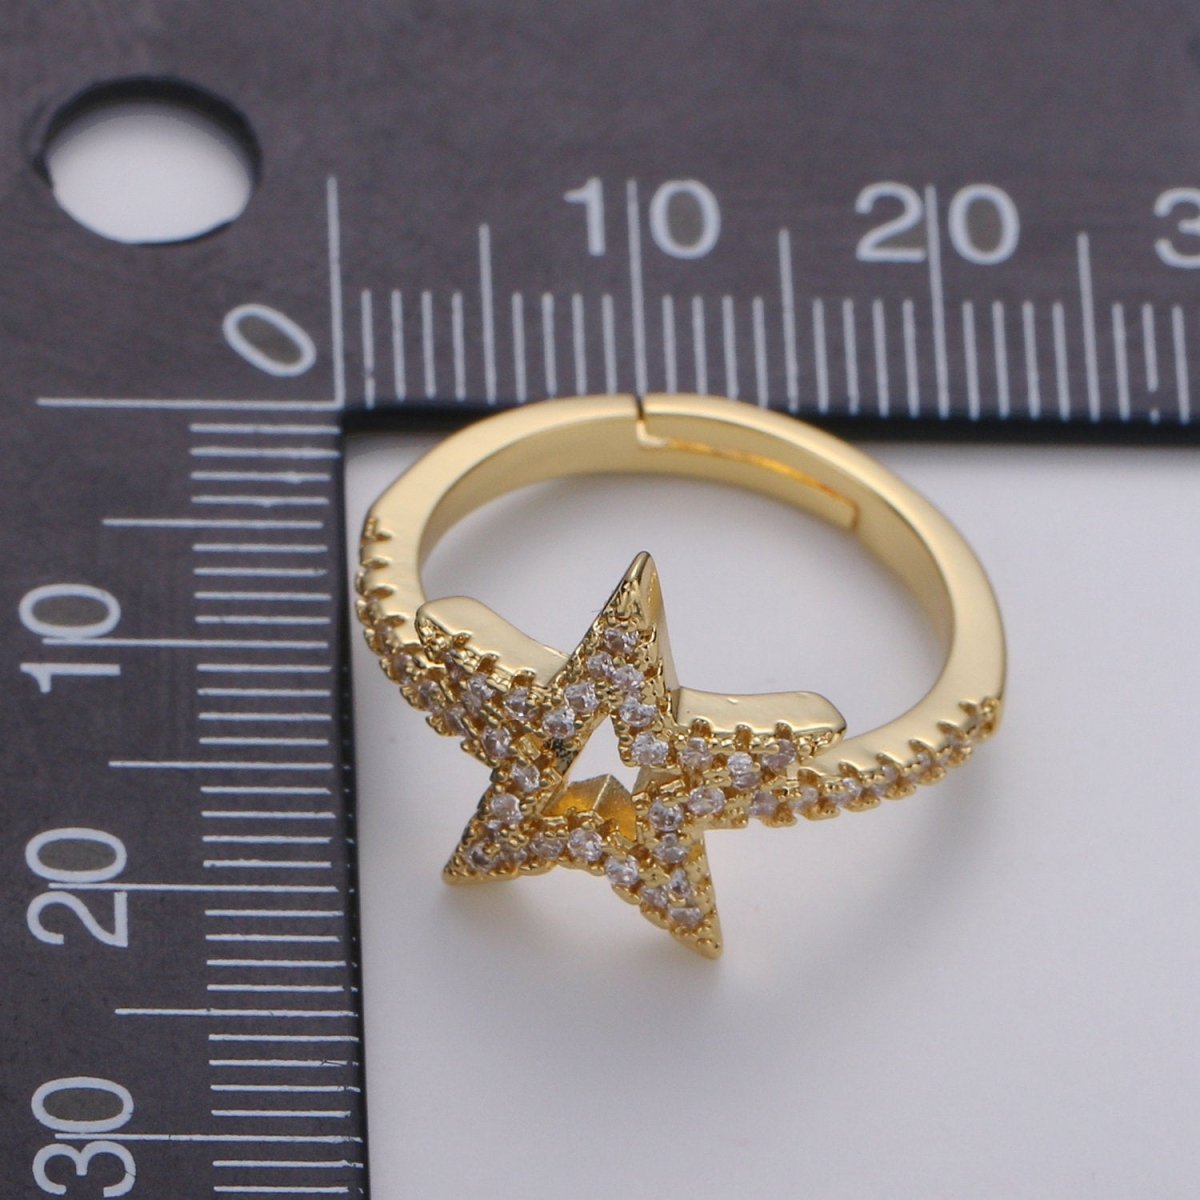 Gold Star Ring, Dainty Star Ring, Adjustable Ring, Minimalist Star Ring, Micro Pave Stackable Ring, Celestial Jewelry Gift Idea Christmas R-064 - DLUXCA